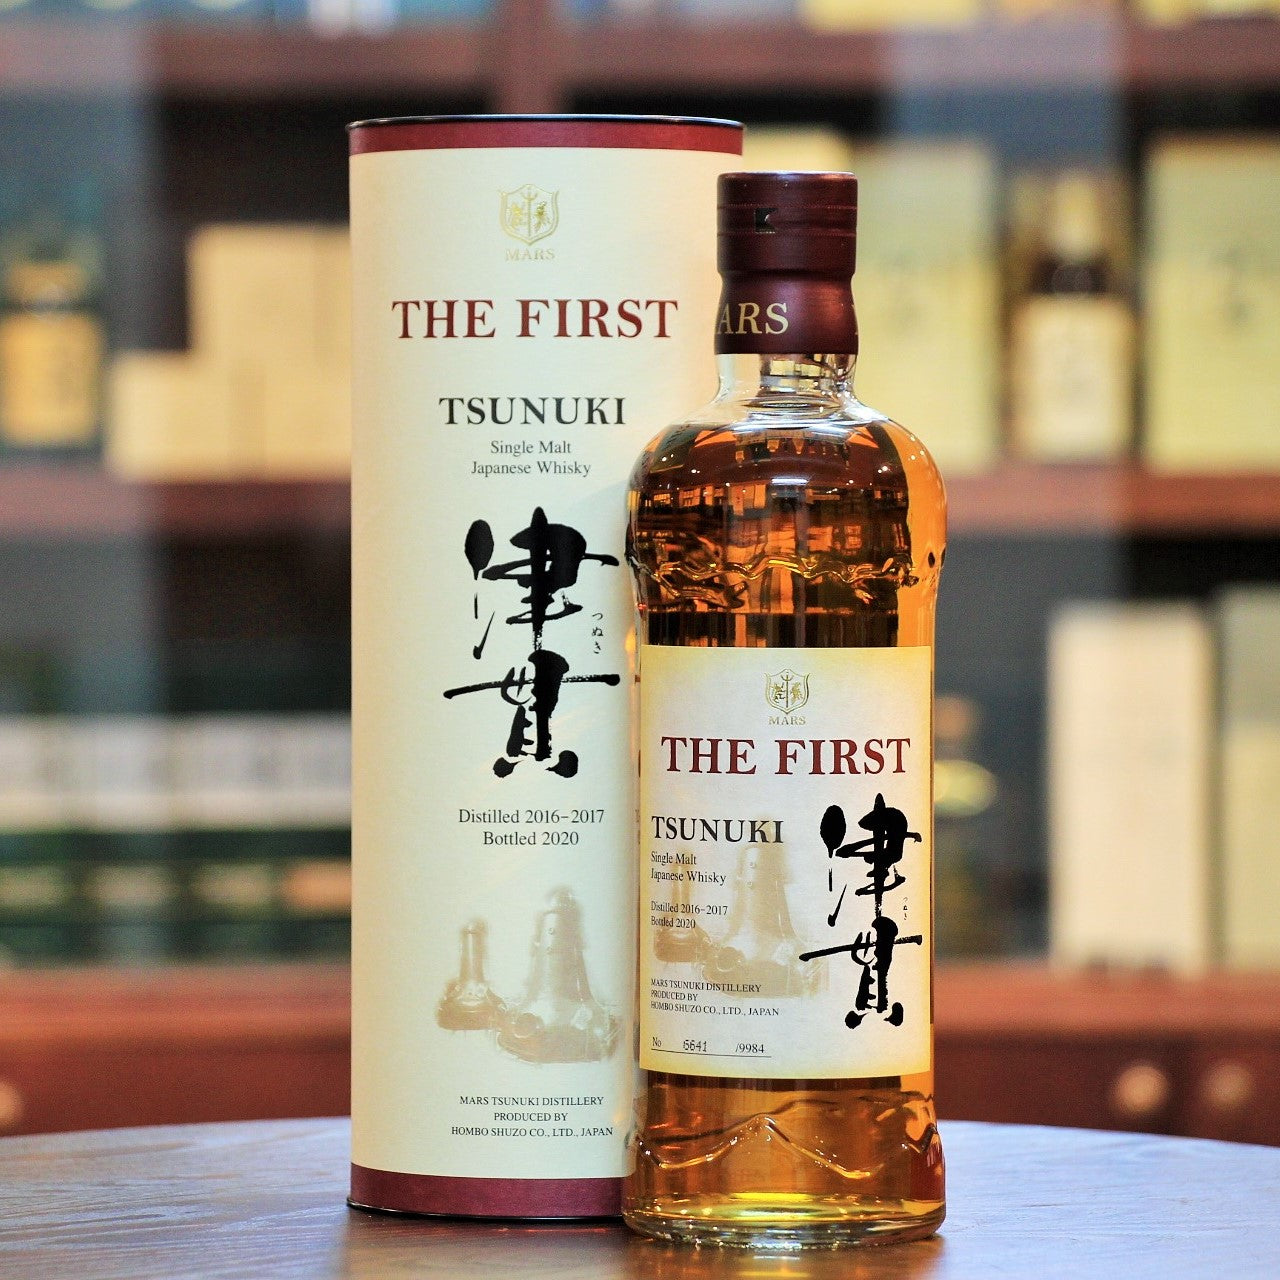 Mars Tsunuki The First Single Malt Japanese Whisky, The first single malt whisky released from the newly built Tsunuki Distillery which was built in 2016.  Distilled in 2016/17, Tsunuki The First has been matured in bourbon barrels and bottled at a natural cask strength of 59% ABV